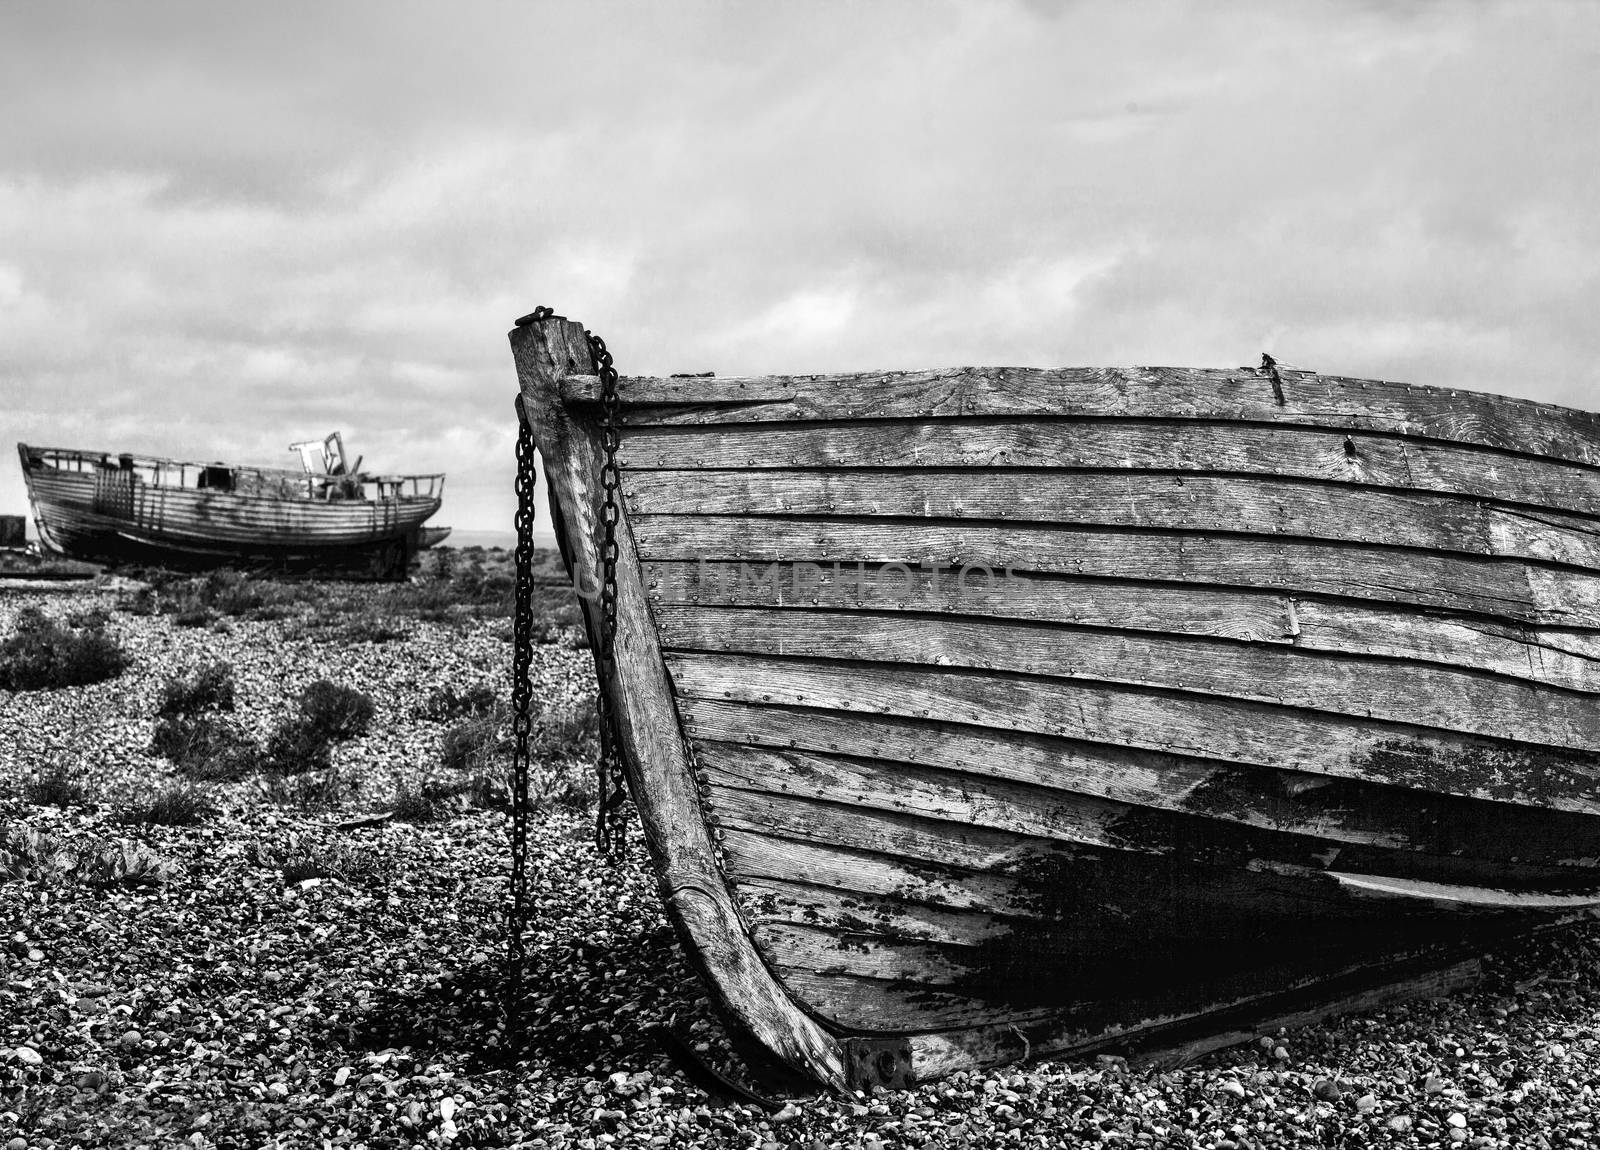 An old abandoned fishing boat stranded on a beech in black and white.